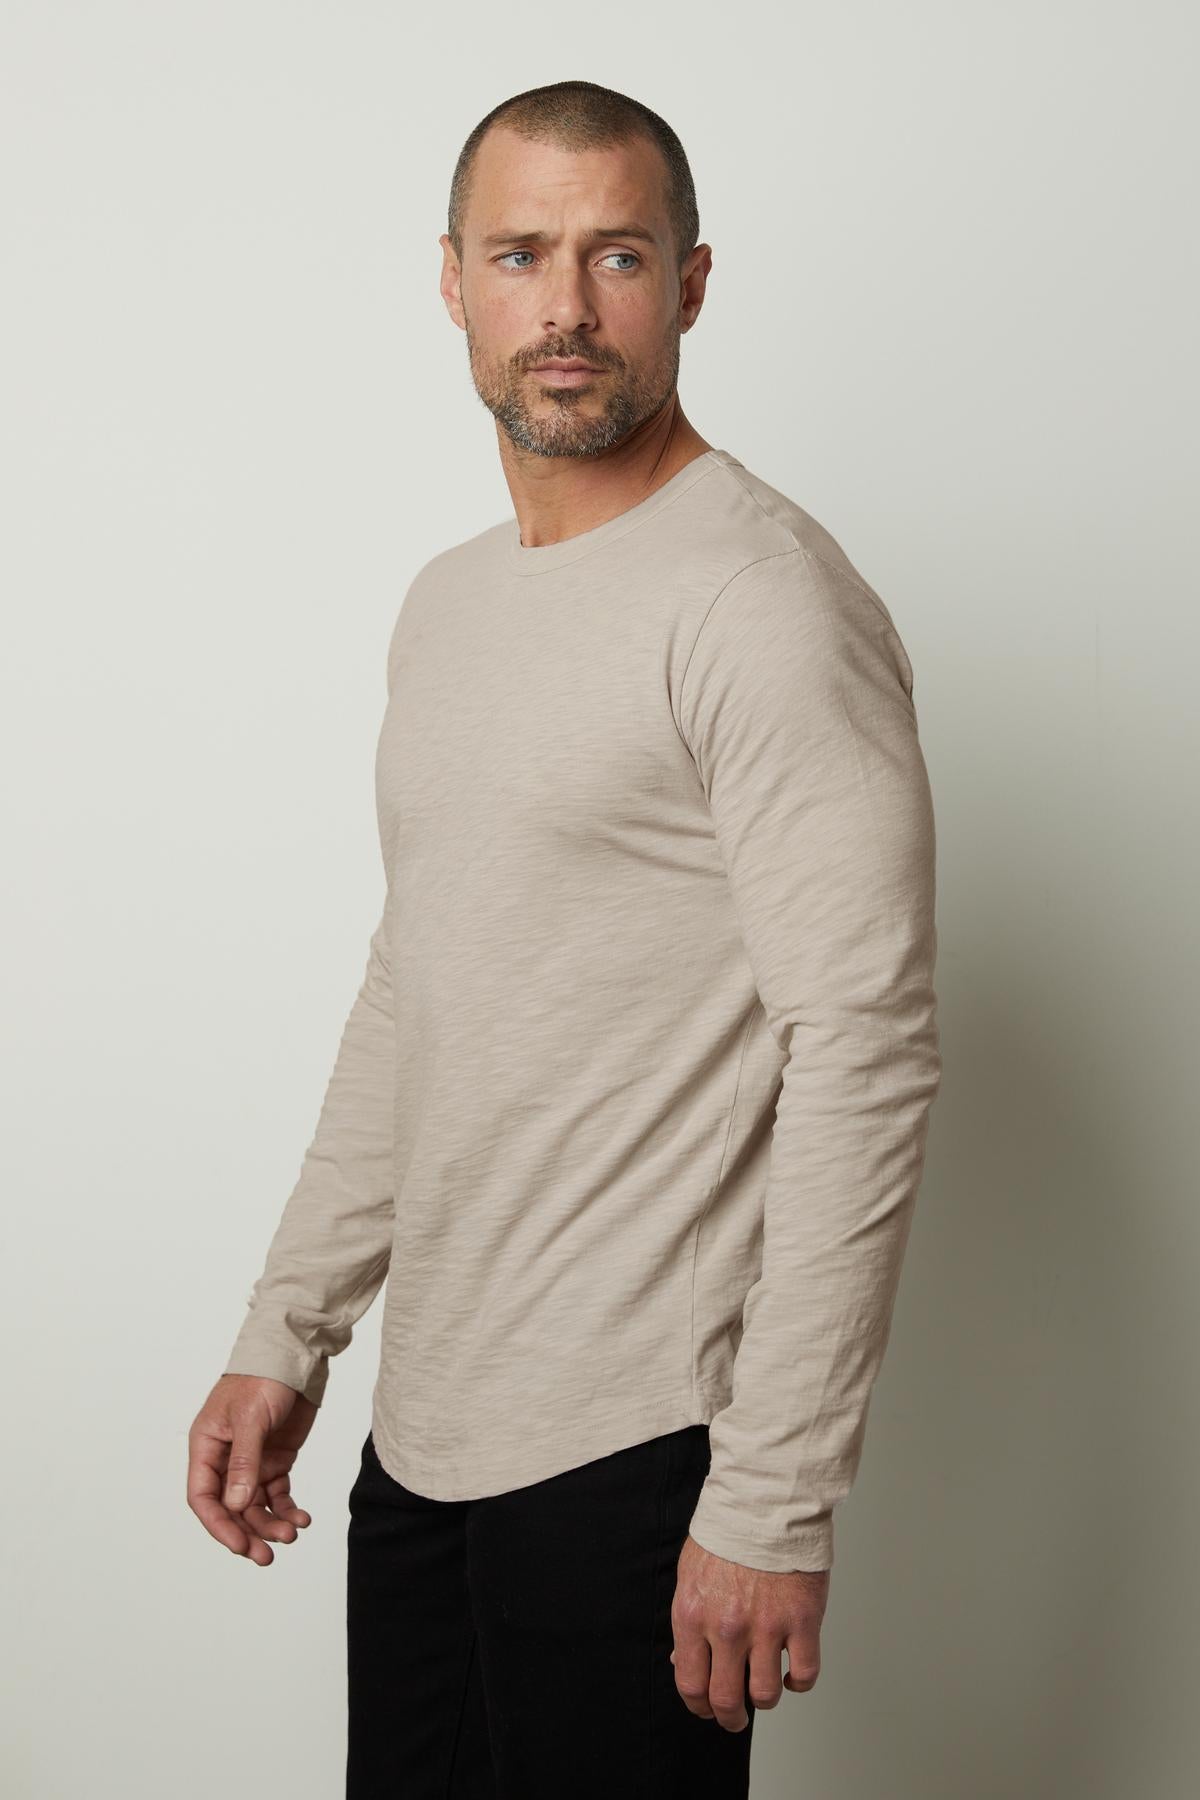   A man wearing a beige long sleeve KAI CREW NECK TEE by Velvet by Graham & Spencer, perfect for layering. 